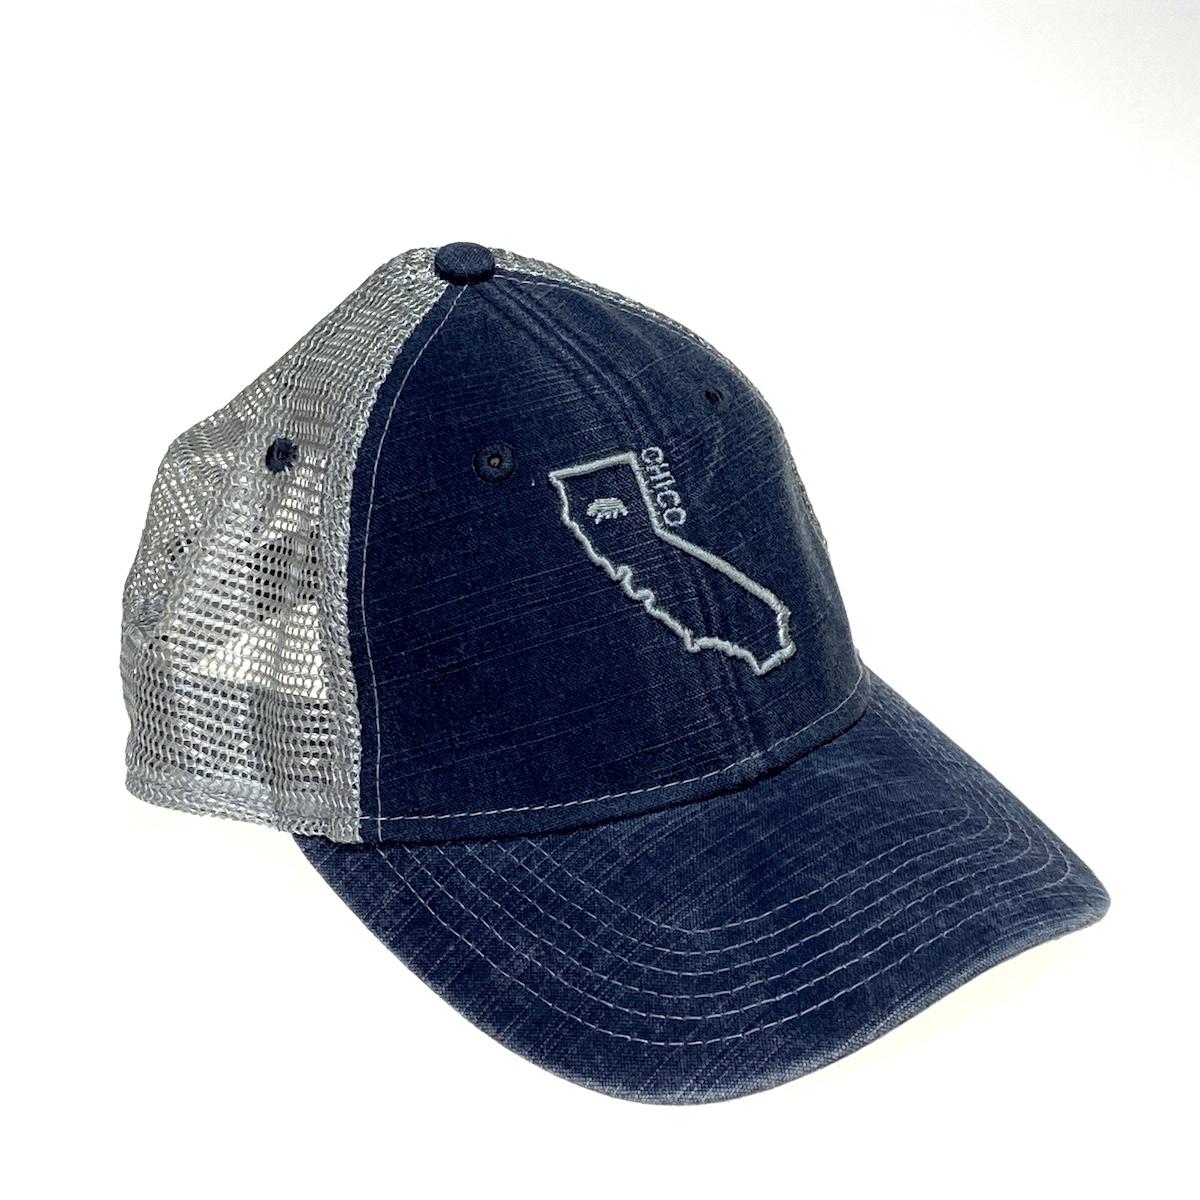 California Outline Chico Hat NVY/GRY   3263713.2